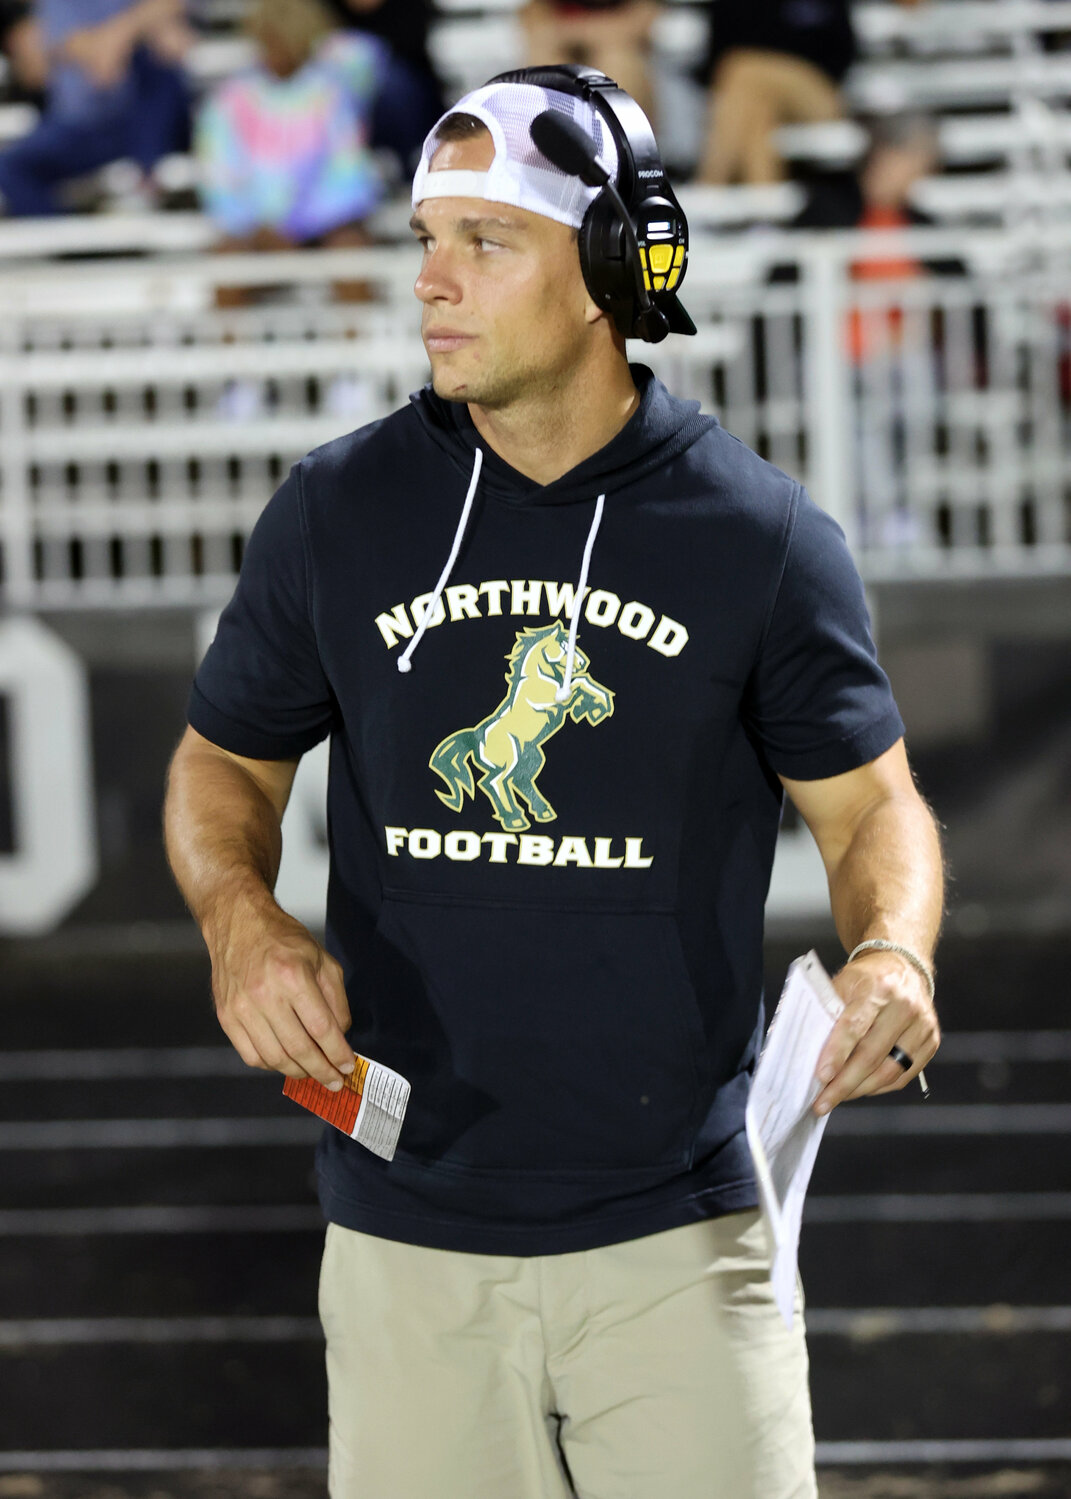 Northwood coach Mitch Johnson has the Chargers ready to make a playoff run. He shares his thoughts on the postseason with the Chatham News & Record.